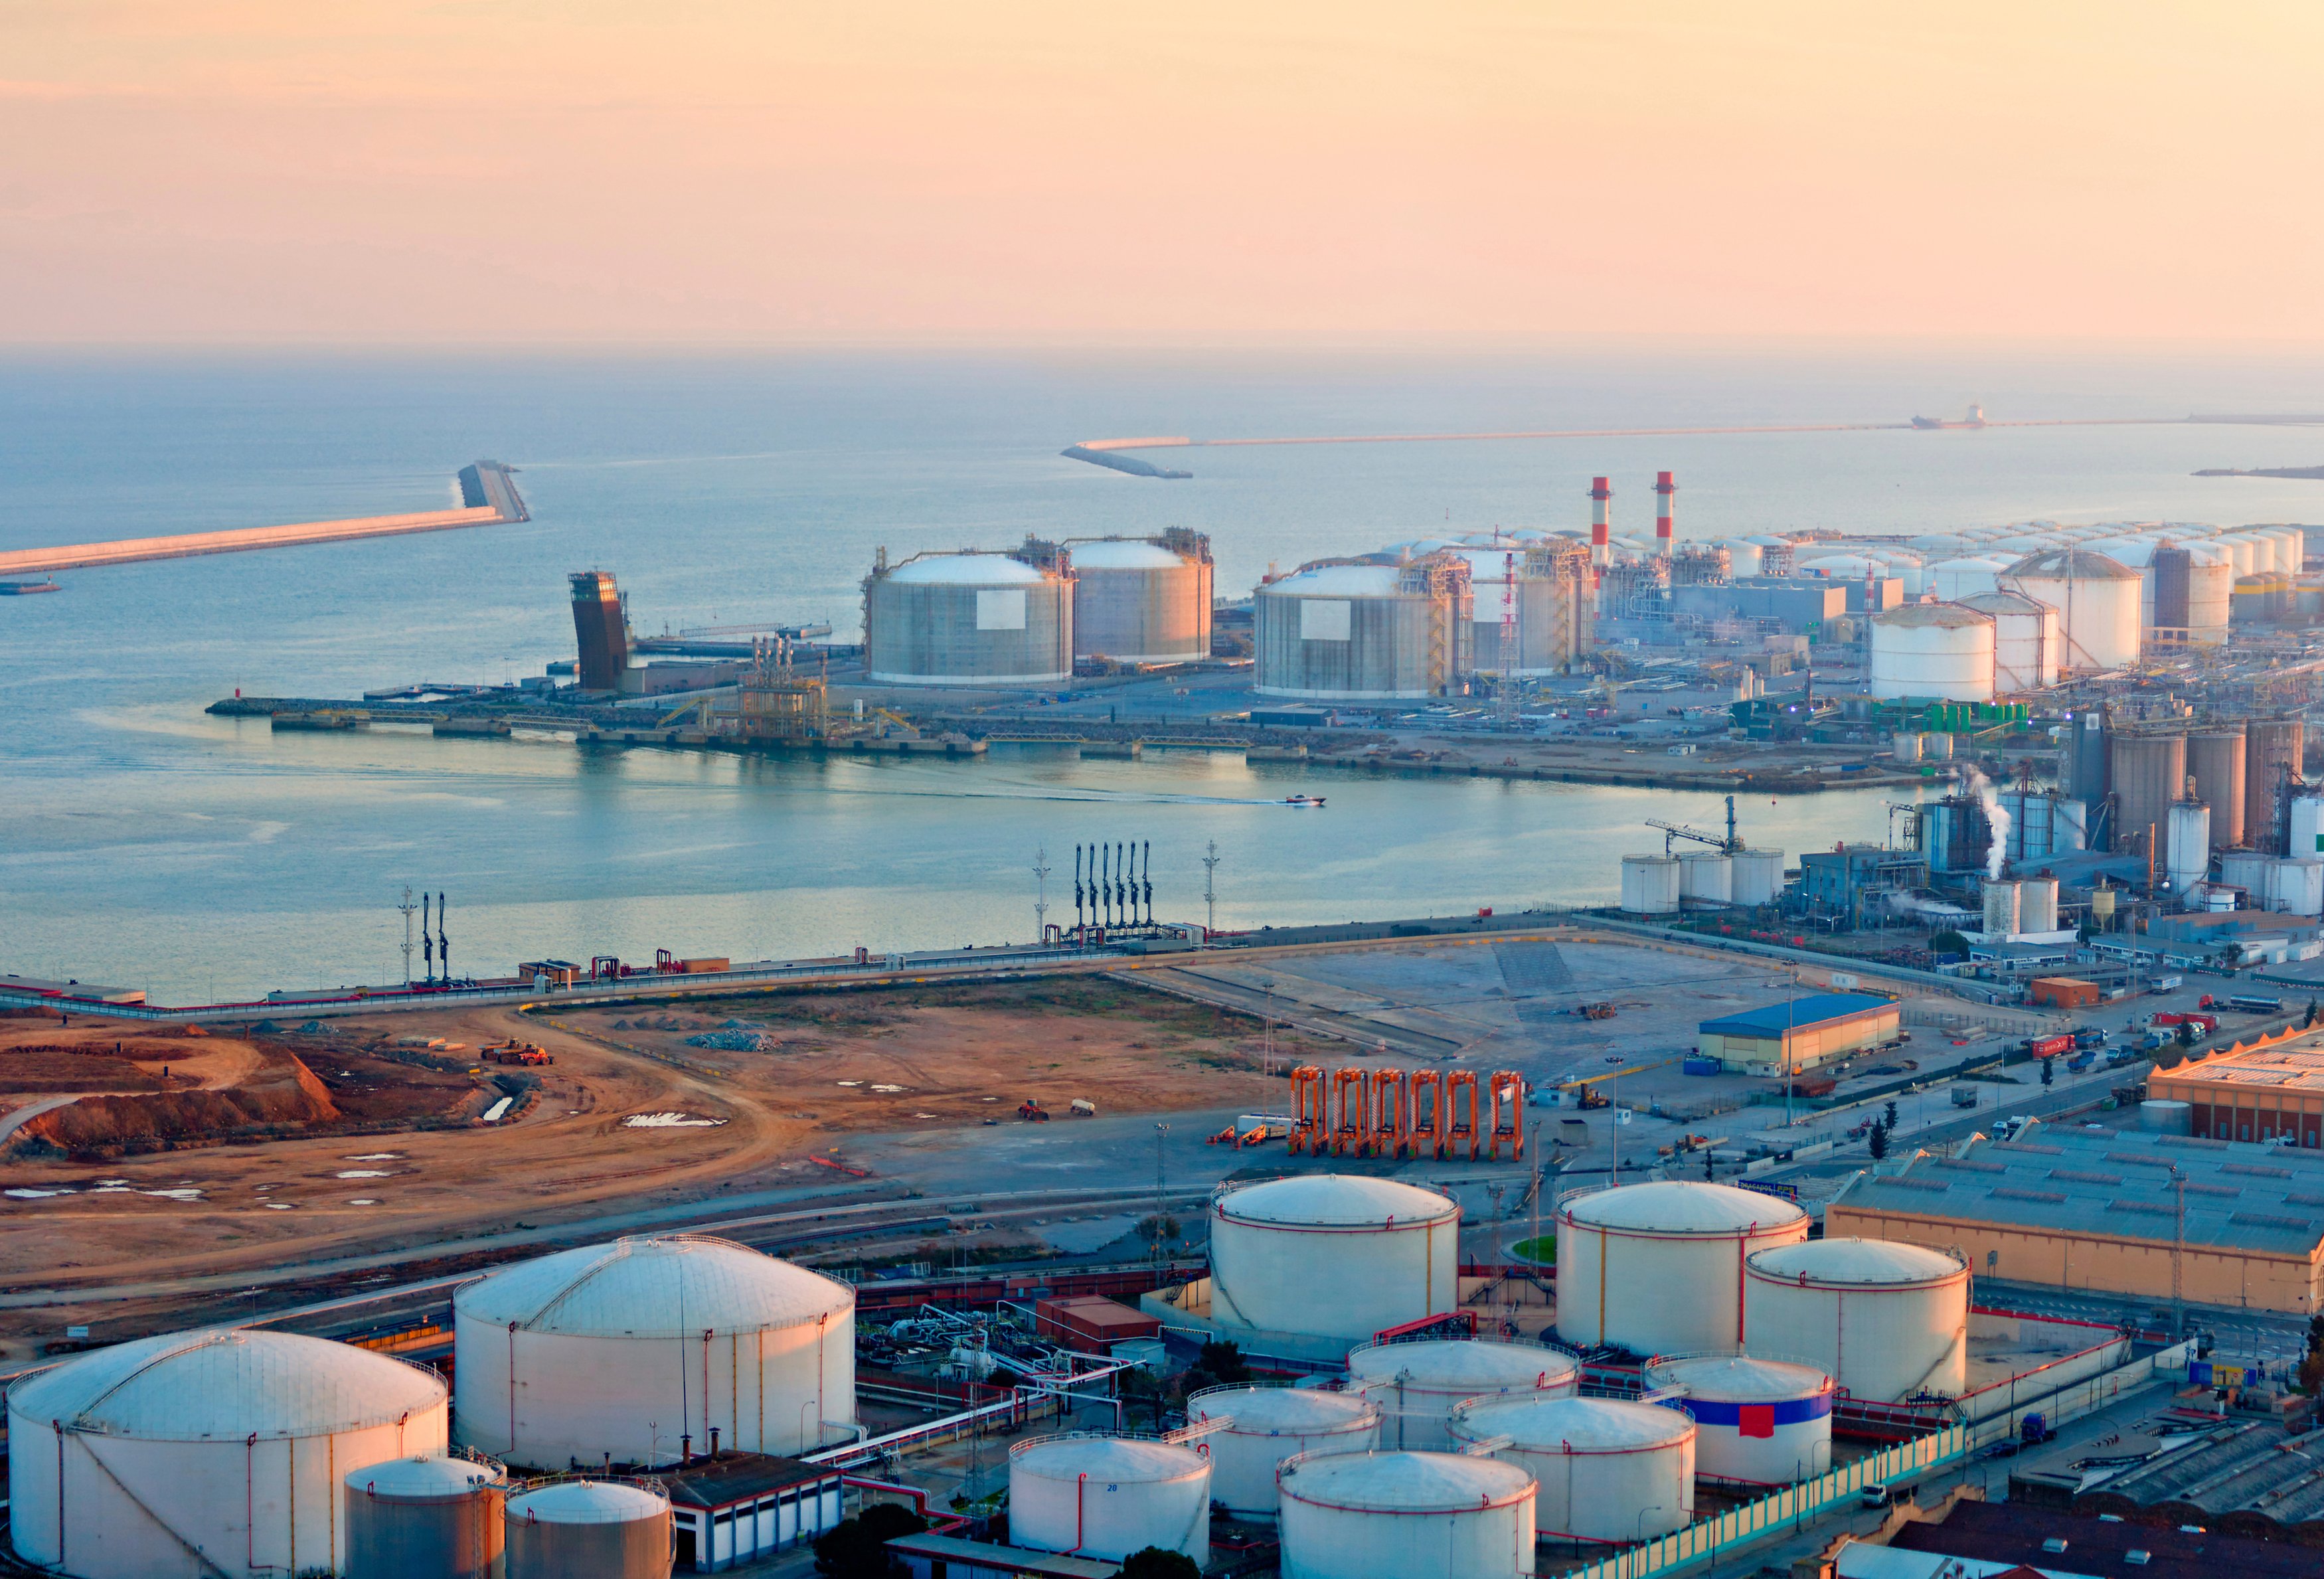 LNG Tanks at the Port of Barcelona at Sunset